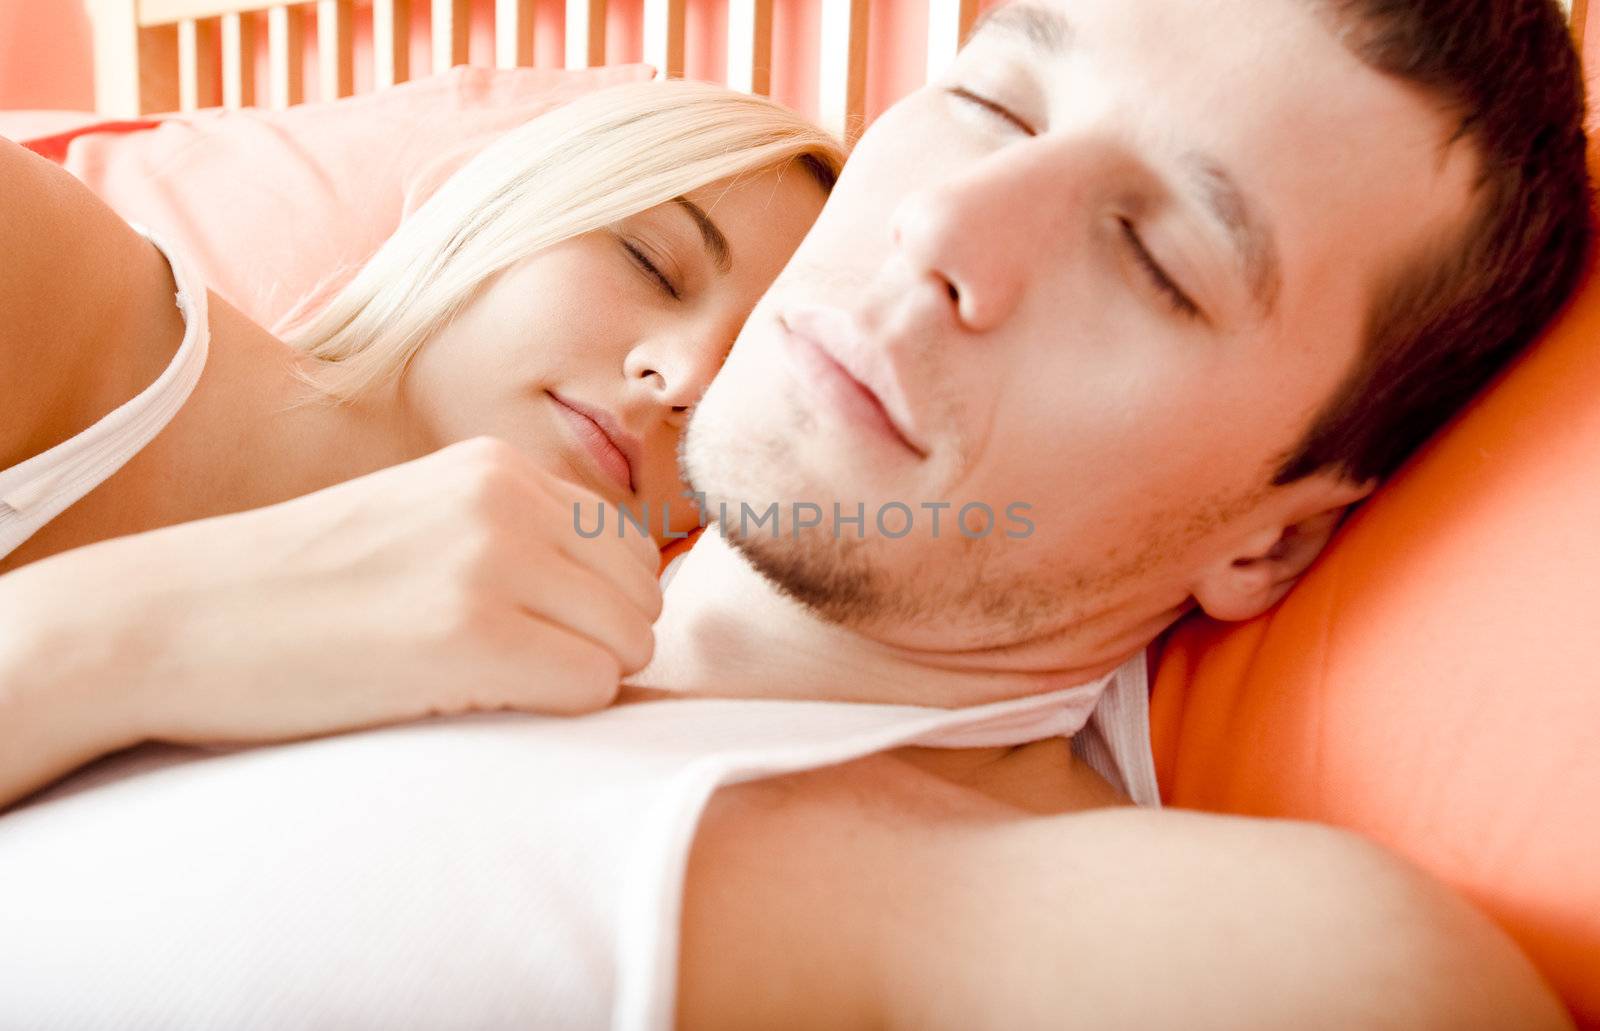 Cropped close-up of man and woman sleeping close together in bed. Horizontal format.